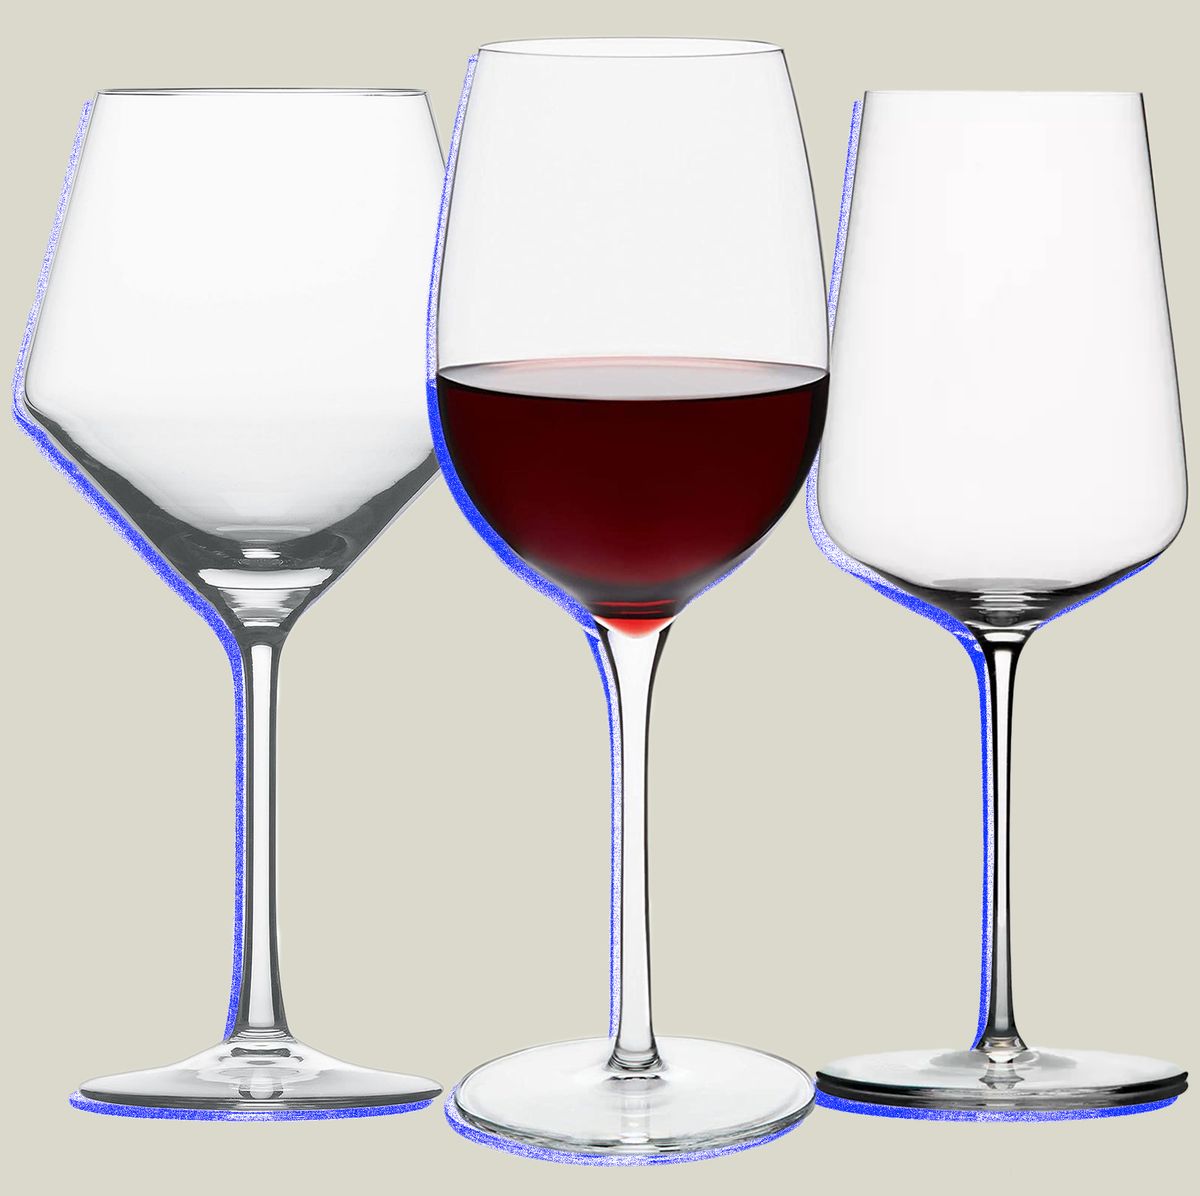 The Best Wine Glasses - 15 to-die-for wine glasses that you need